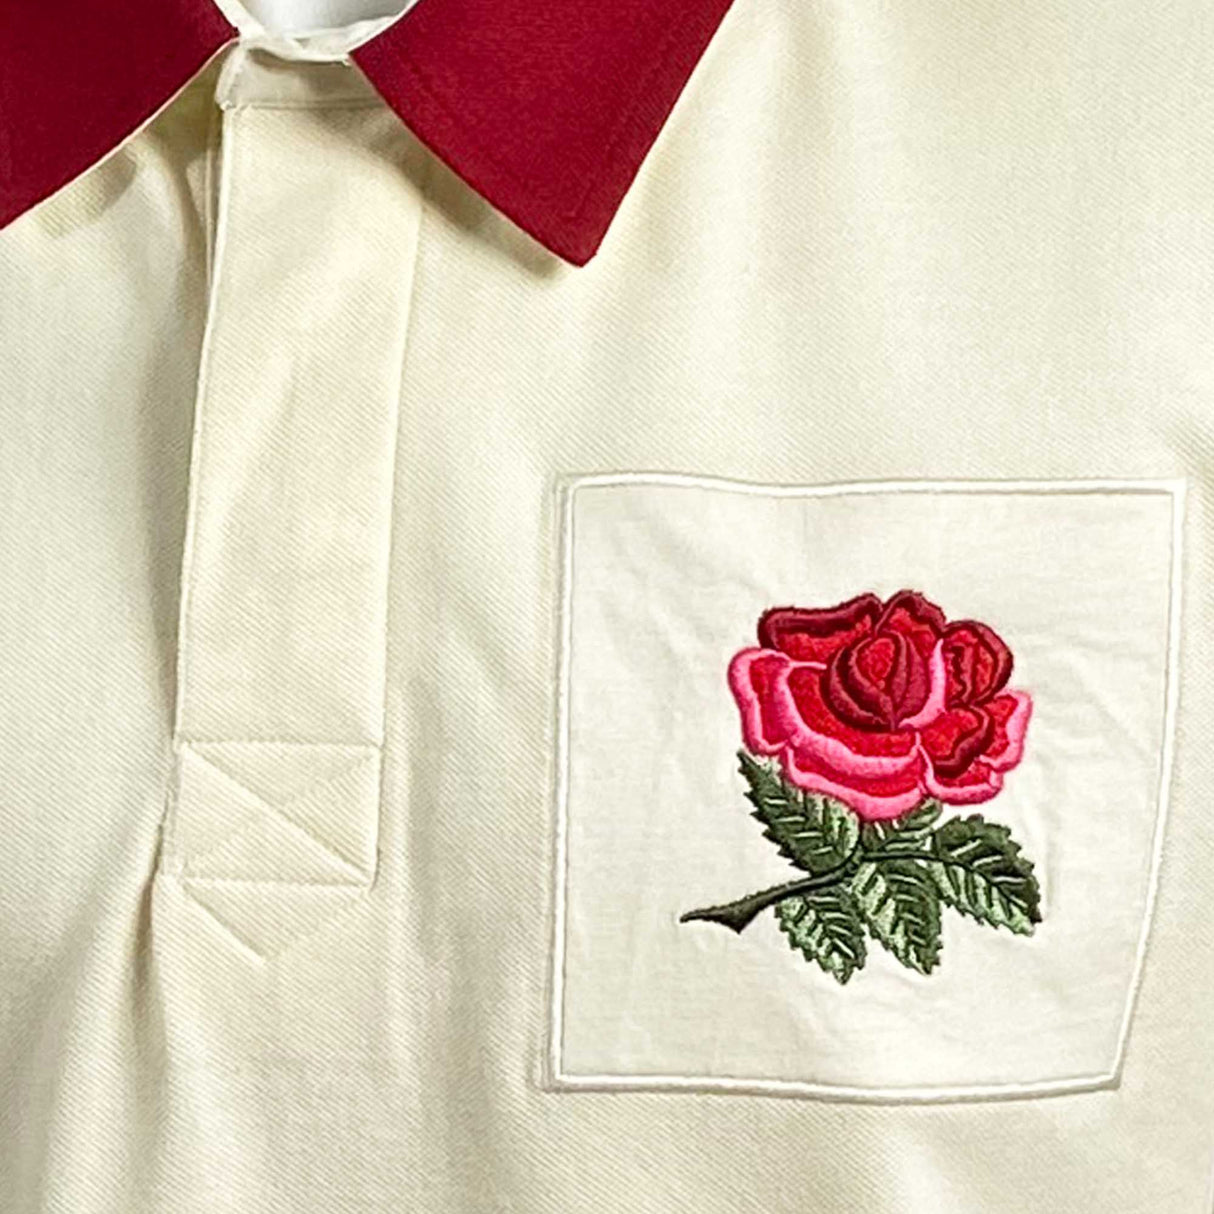 Ellis Rugby England Polo 1923 |Polo Shirt | Ellis Rugby | Absolute Rugby